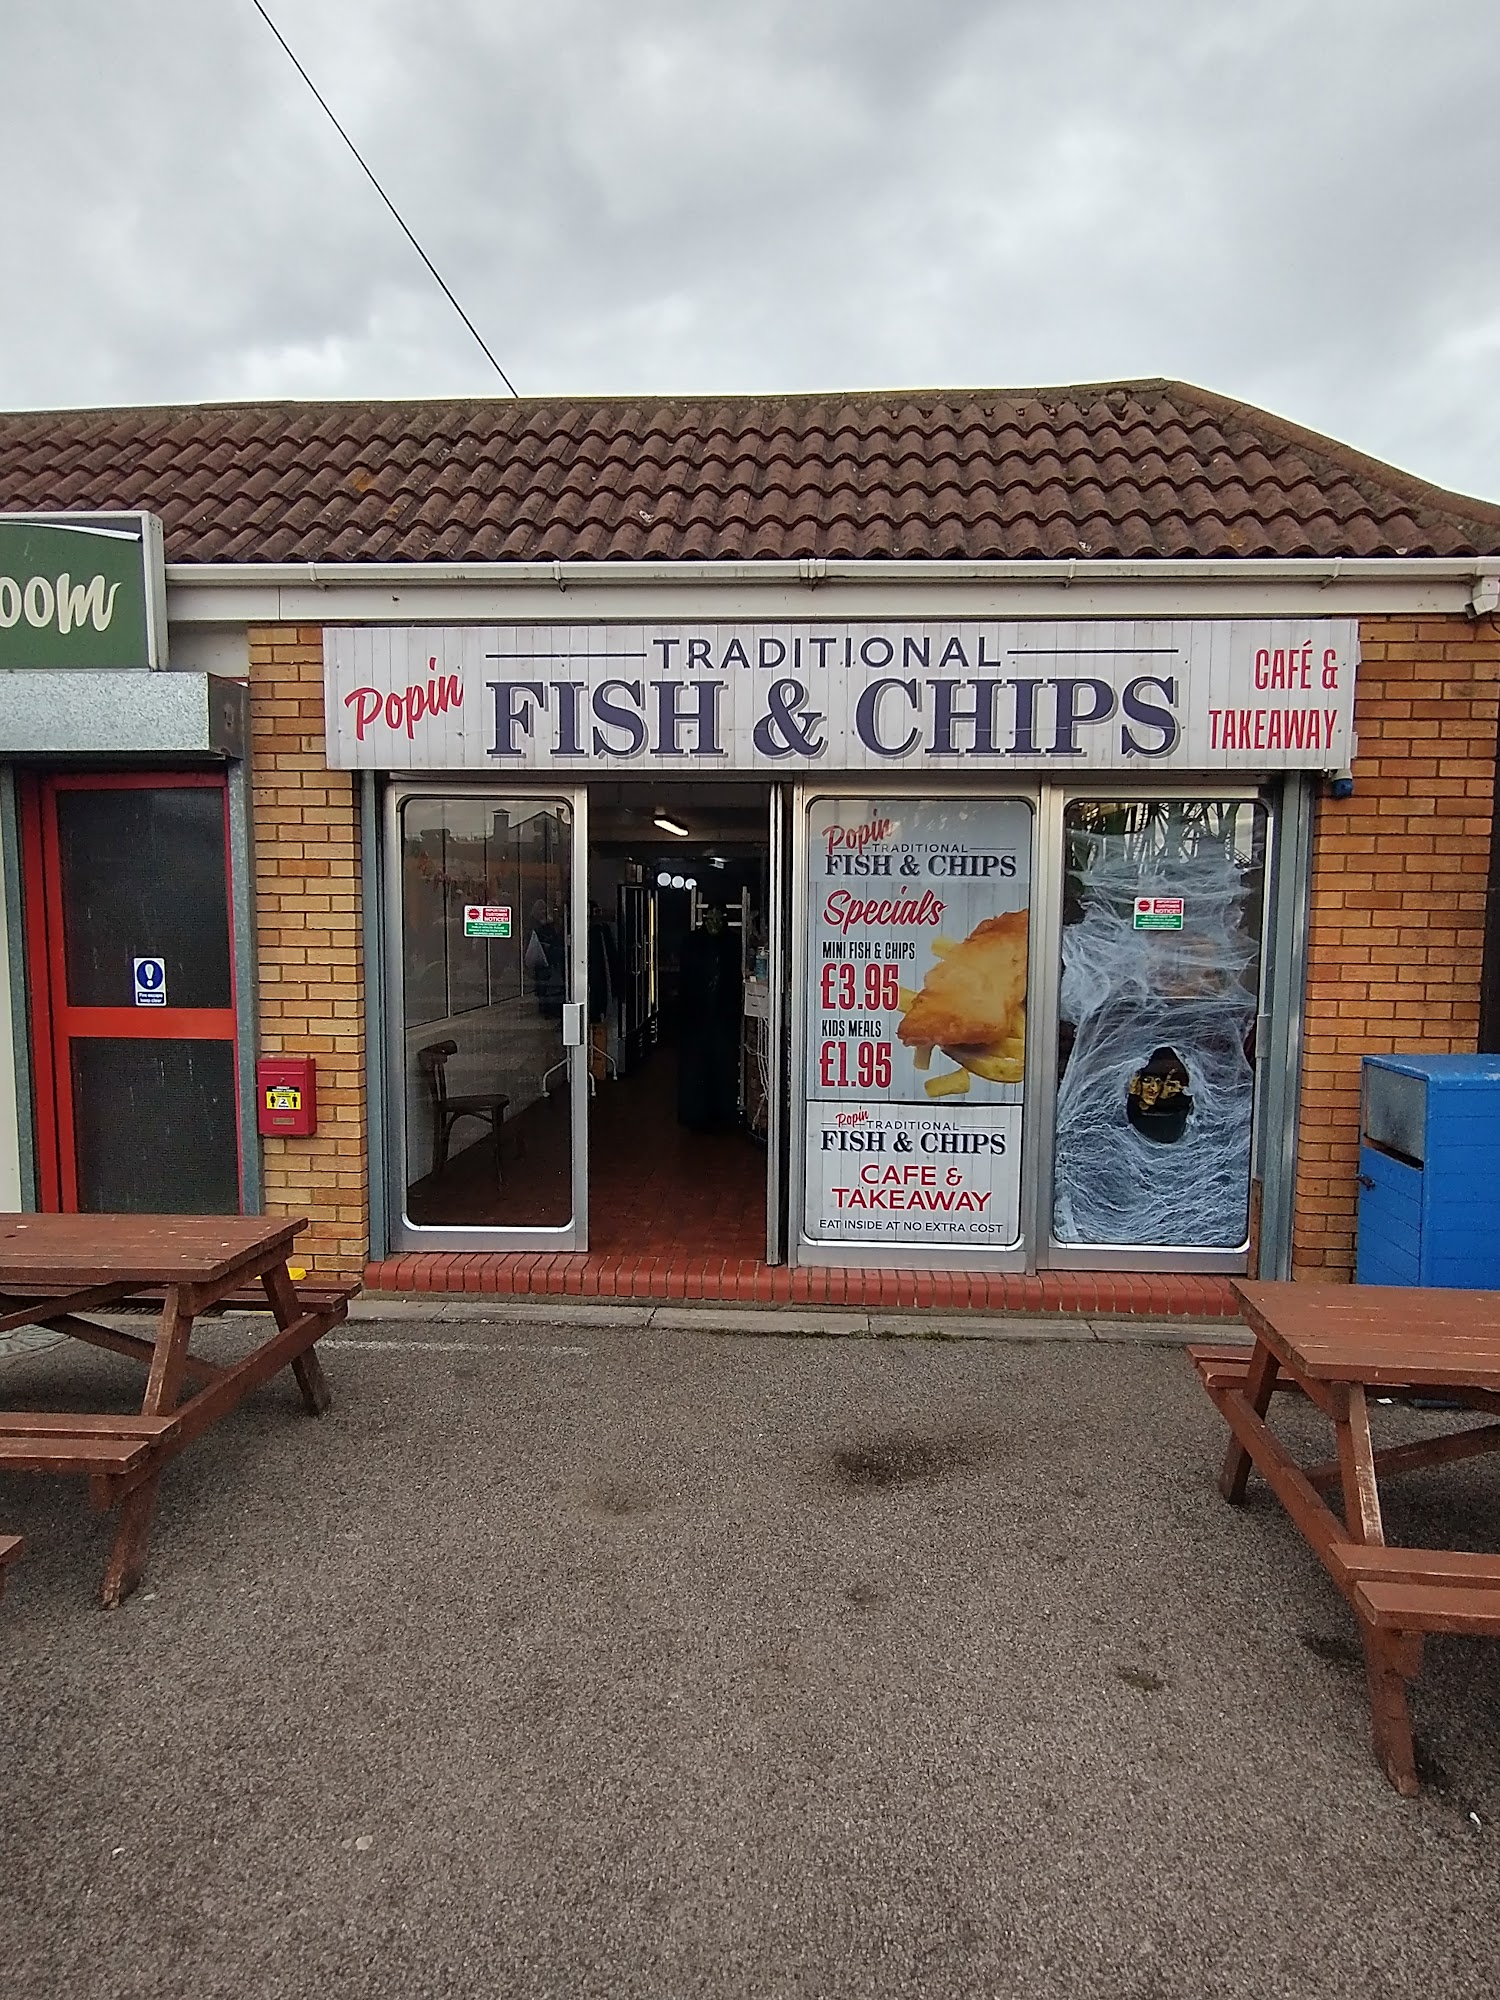 Popin Fish & Chips cafe